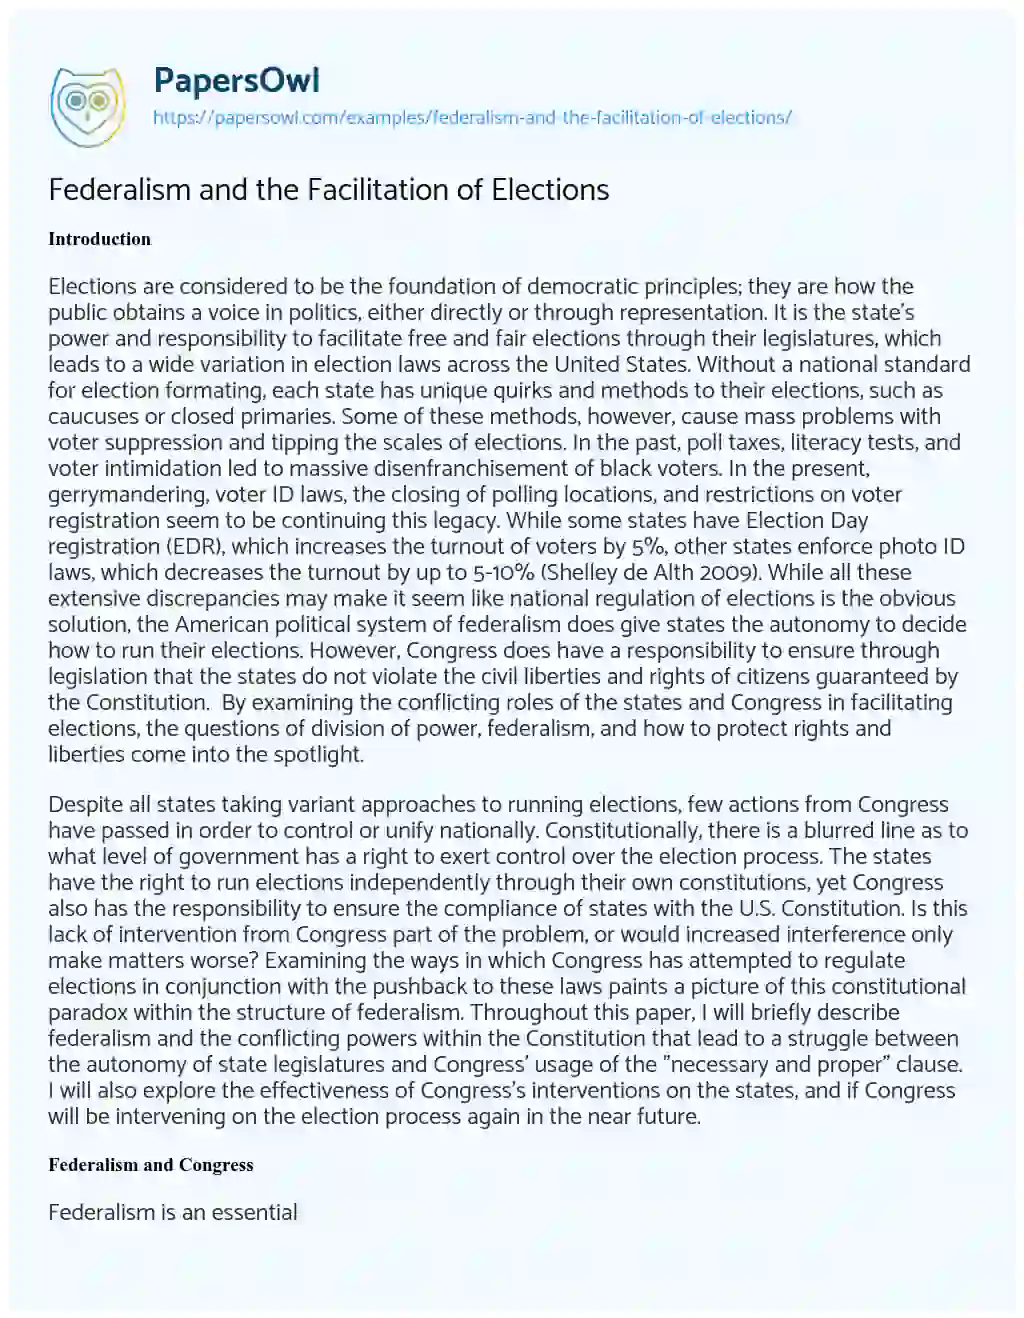 Essay on Federalism and the Facilitation of Elections